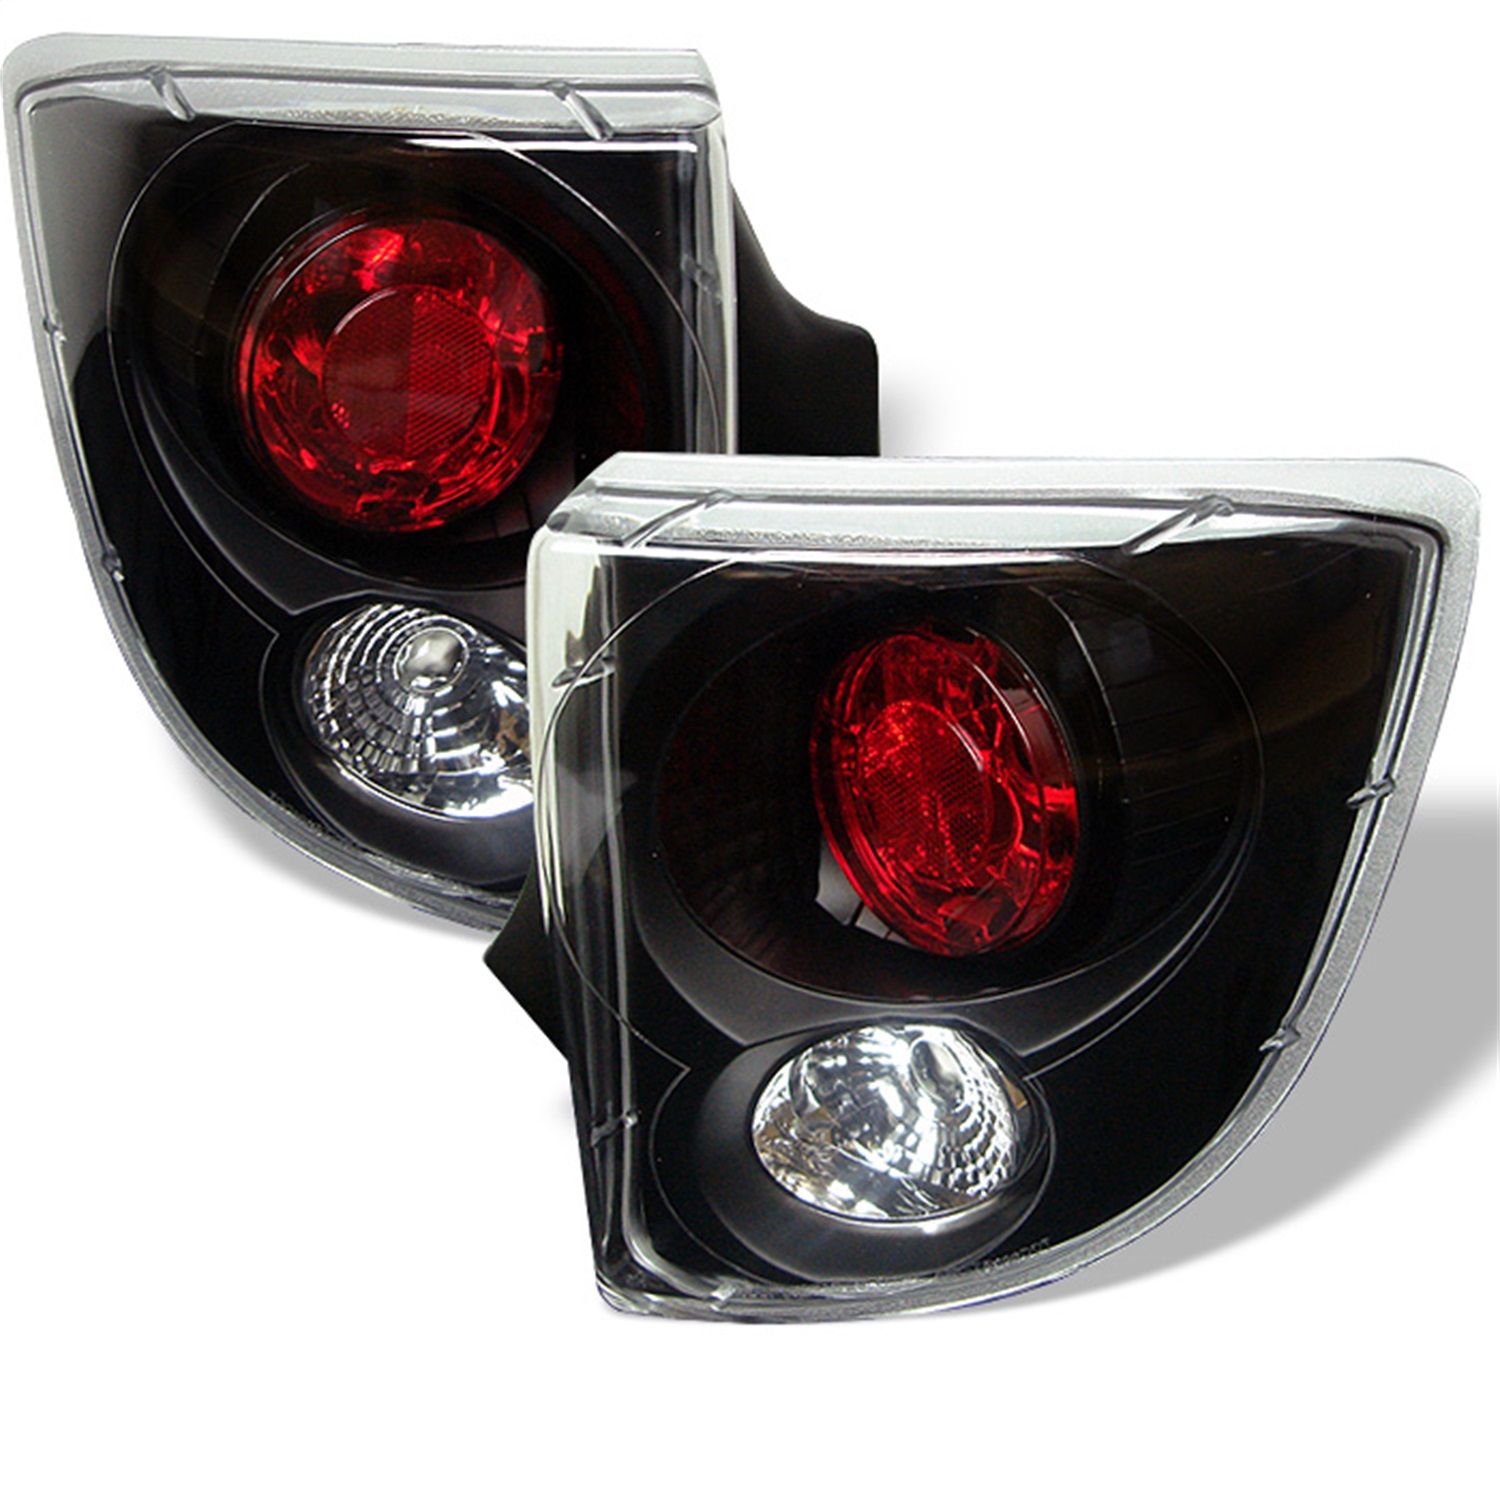 Spyder Auto 5007506 Euro Style Tail Lights Fits 00-05 Celica